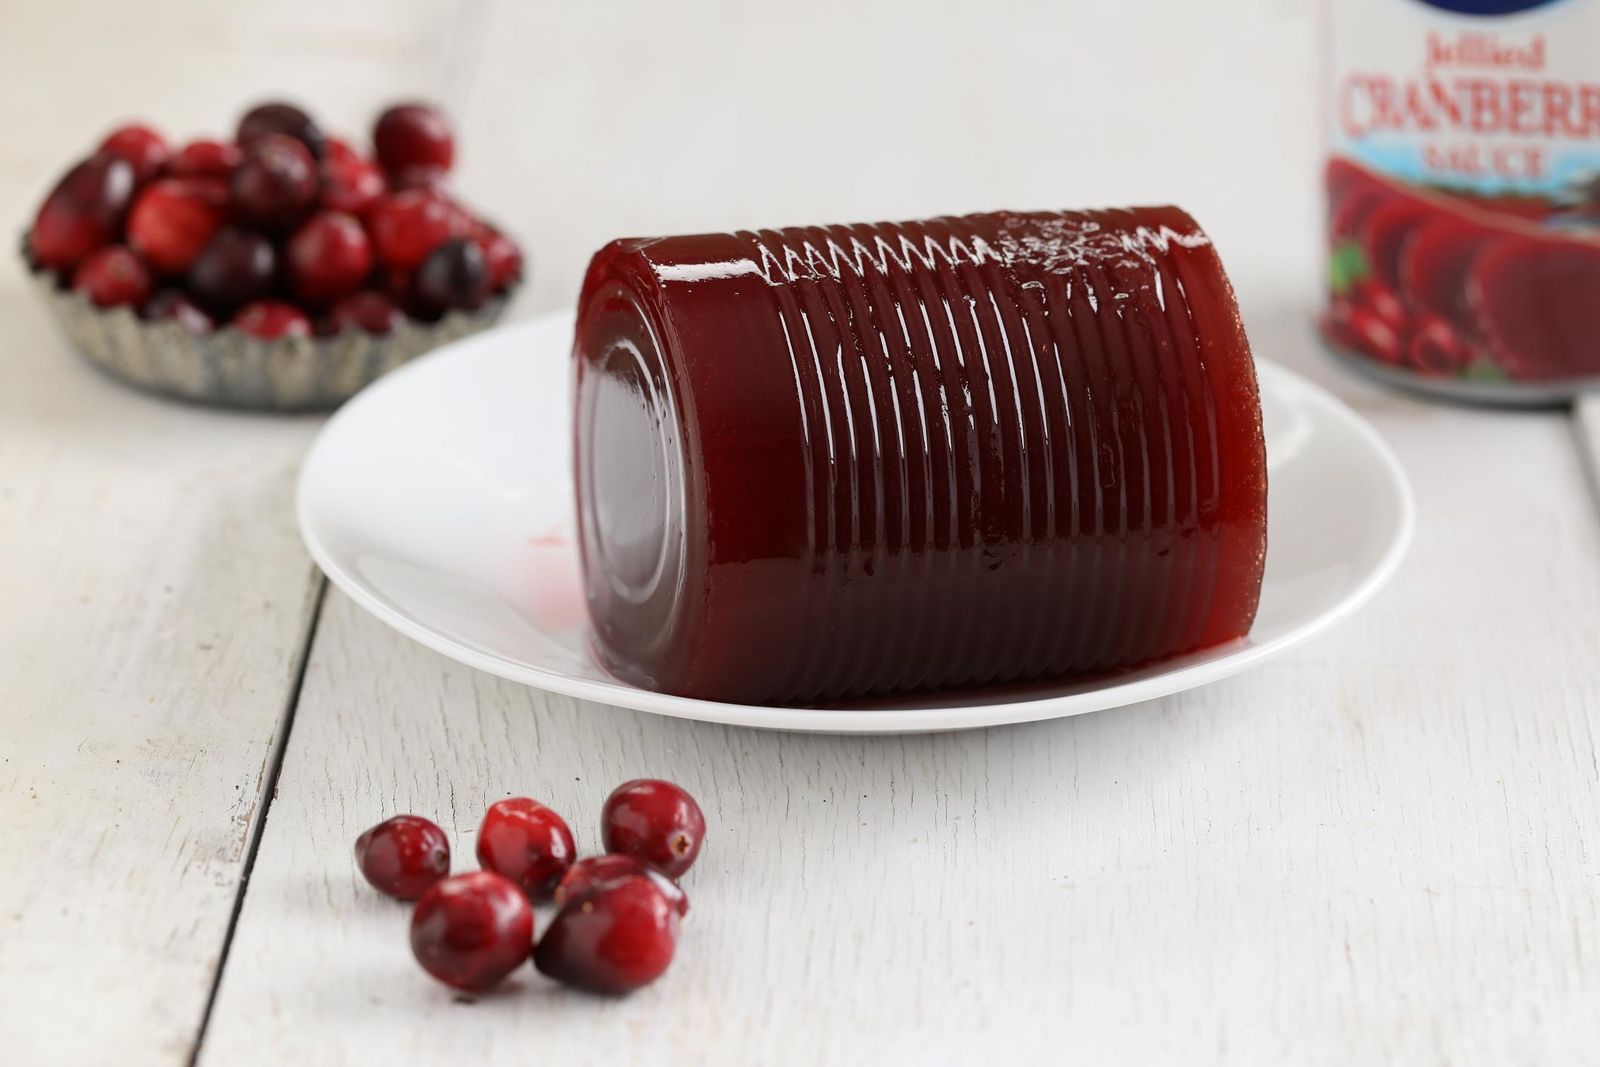 This Man Made the First Canned Cranberry Sauce, Arts & Culture